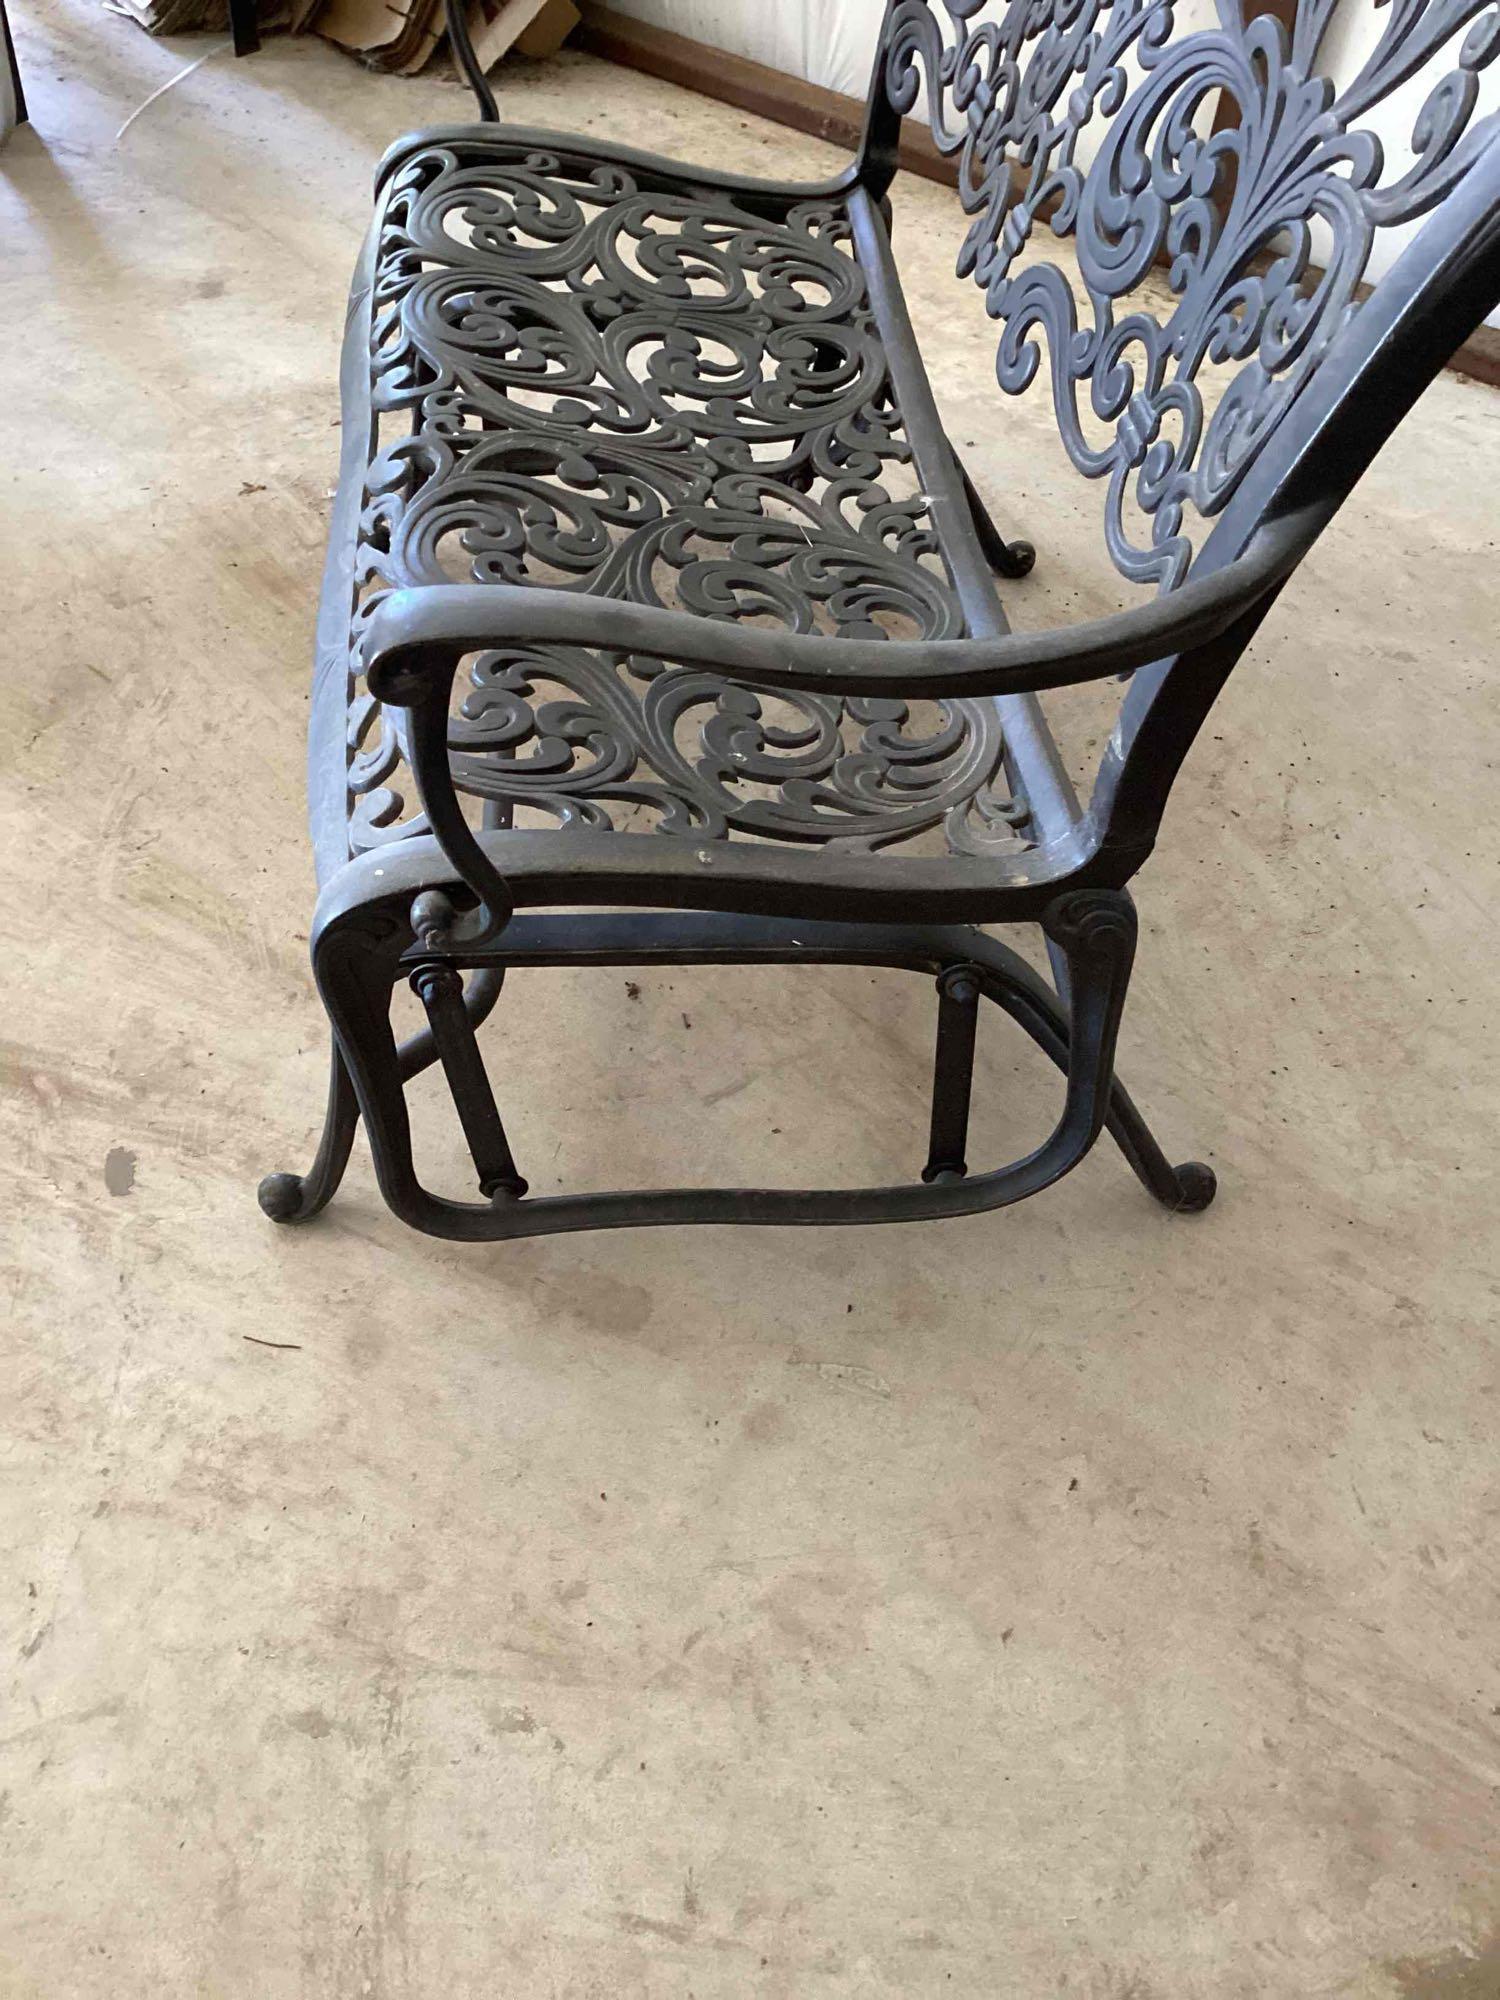 Wrought iron glider bench. Two cushions are included but it is...comfortable with or without the